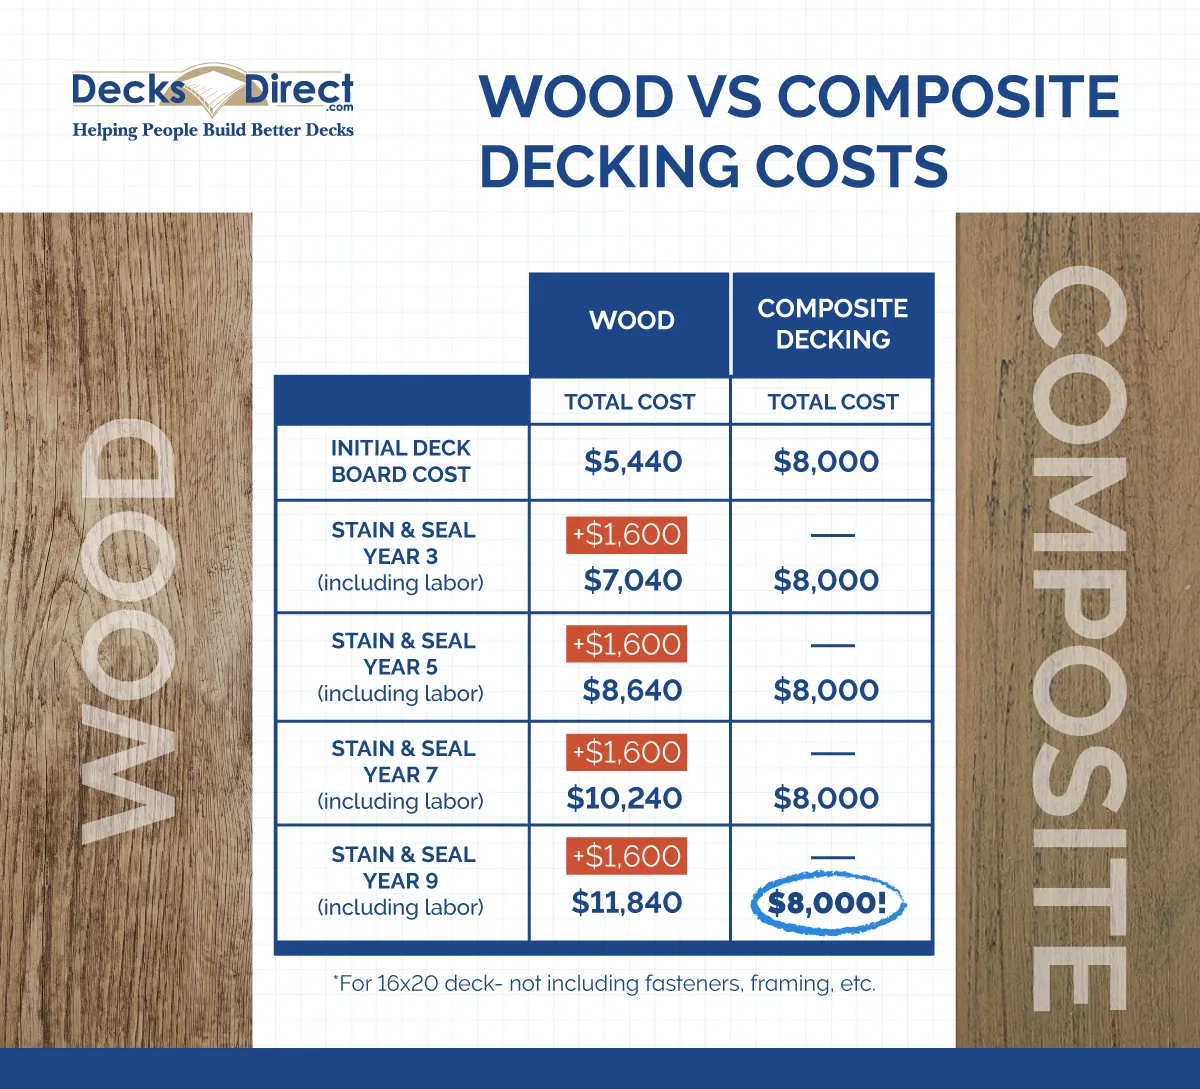 A chart comparing the long-term costs of composite vs wood decking over the first ten years of the deck's life